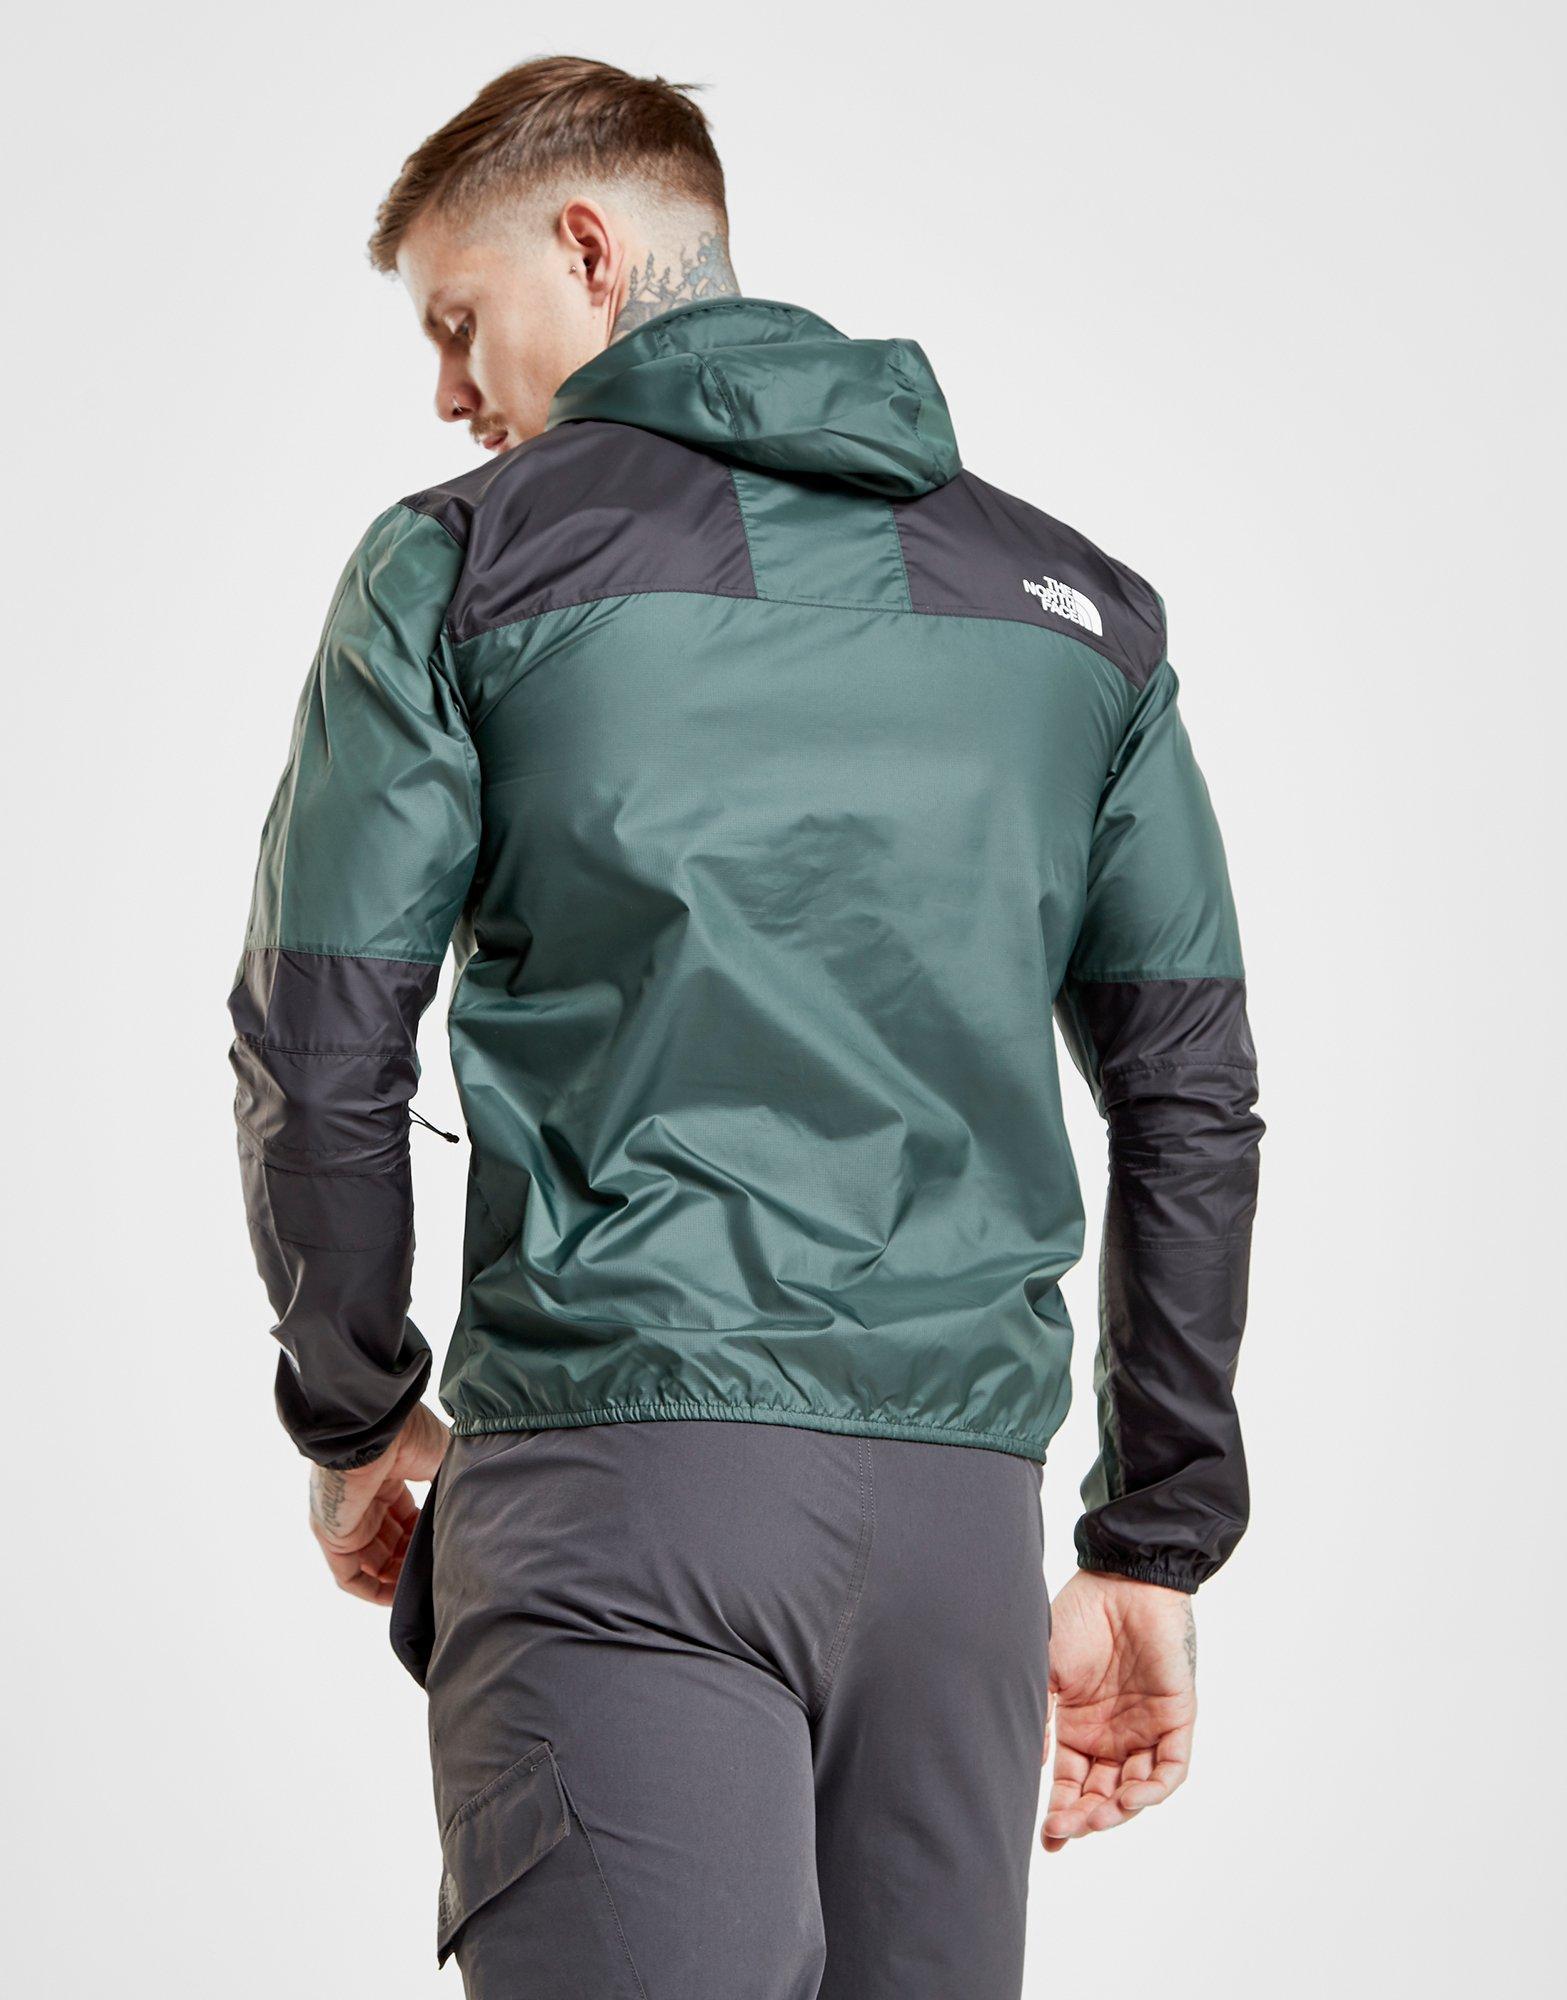 The North Face $1985 Jacket Jungle/ in Green/Black (Green) for Men - Lyst